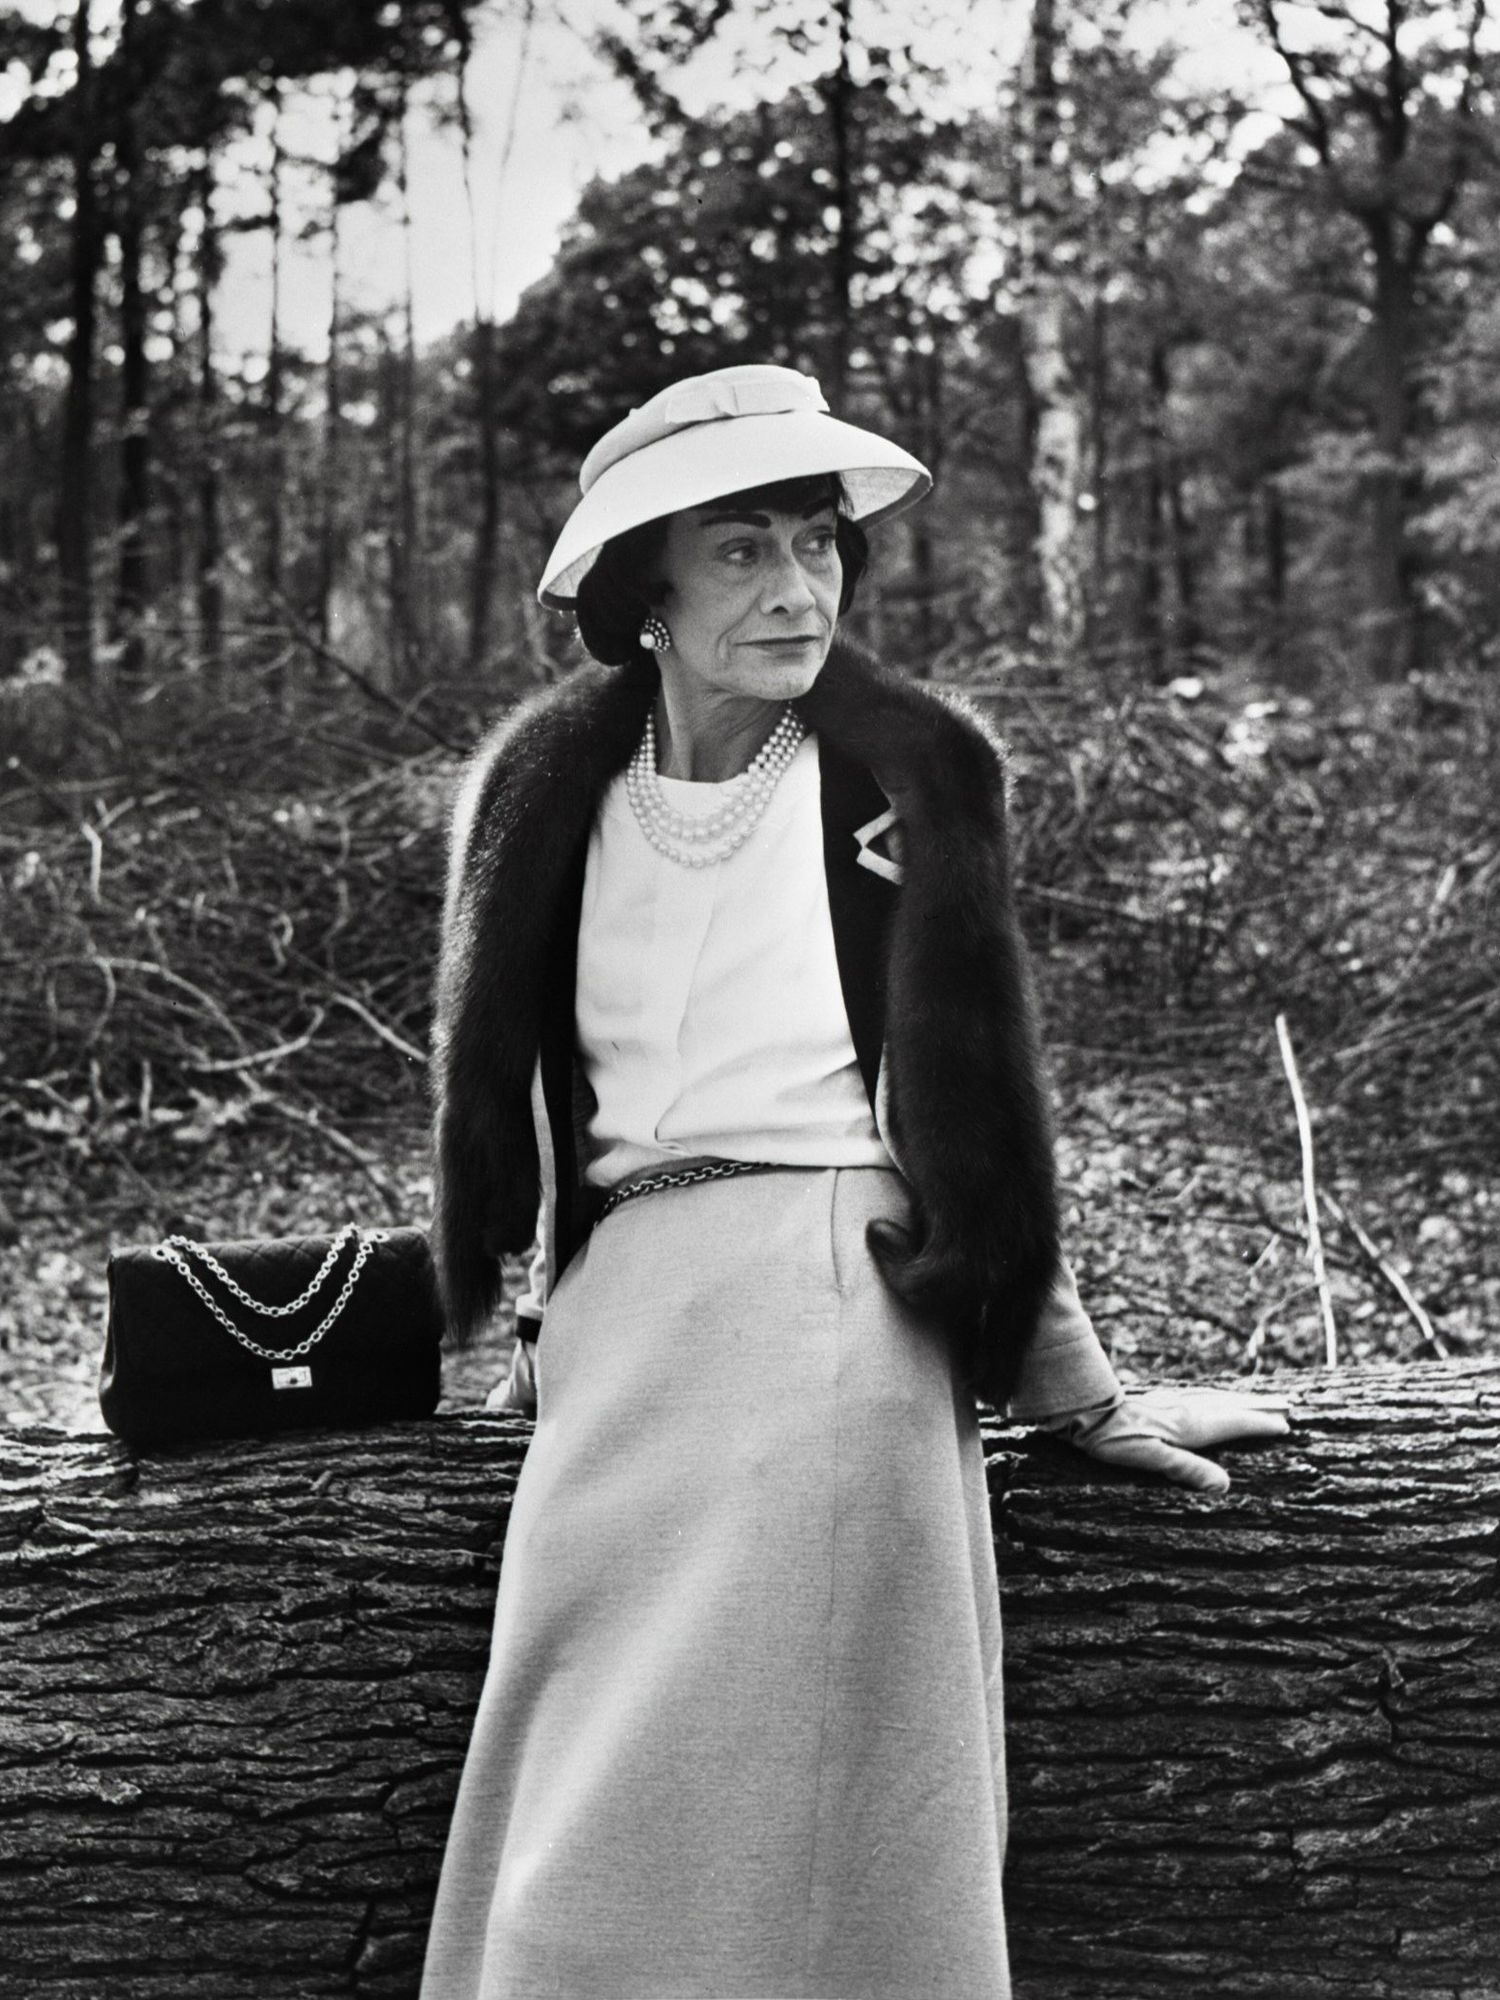 Archive photo of Gabrielle Chanel from 1957 with the 2.55 bag